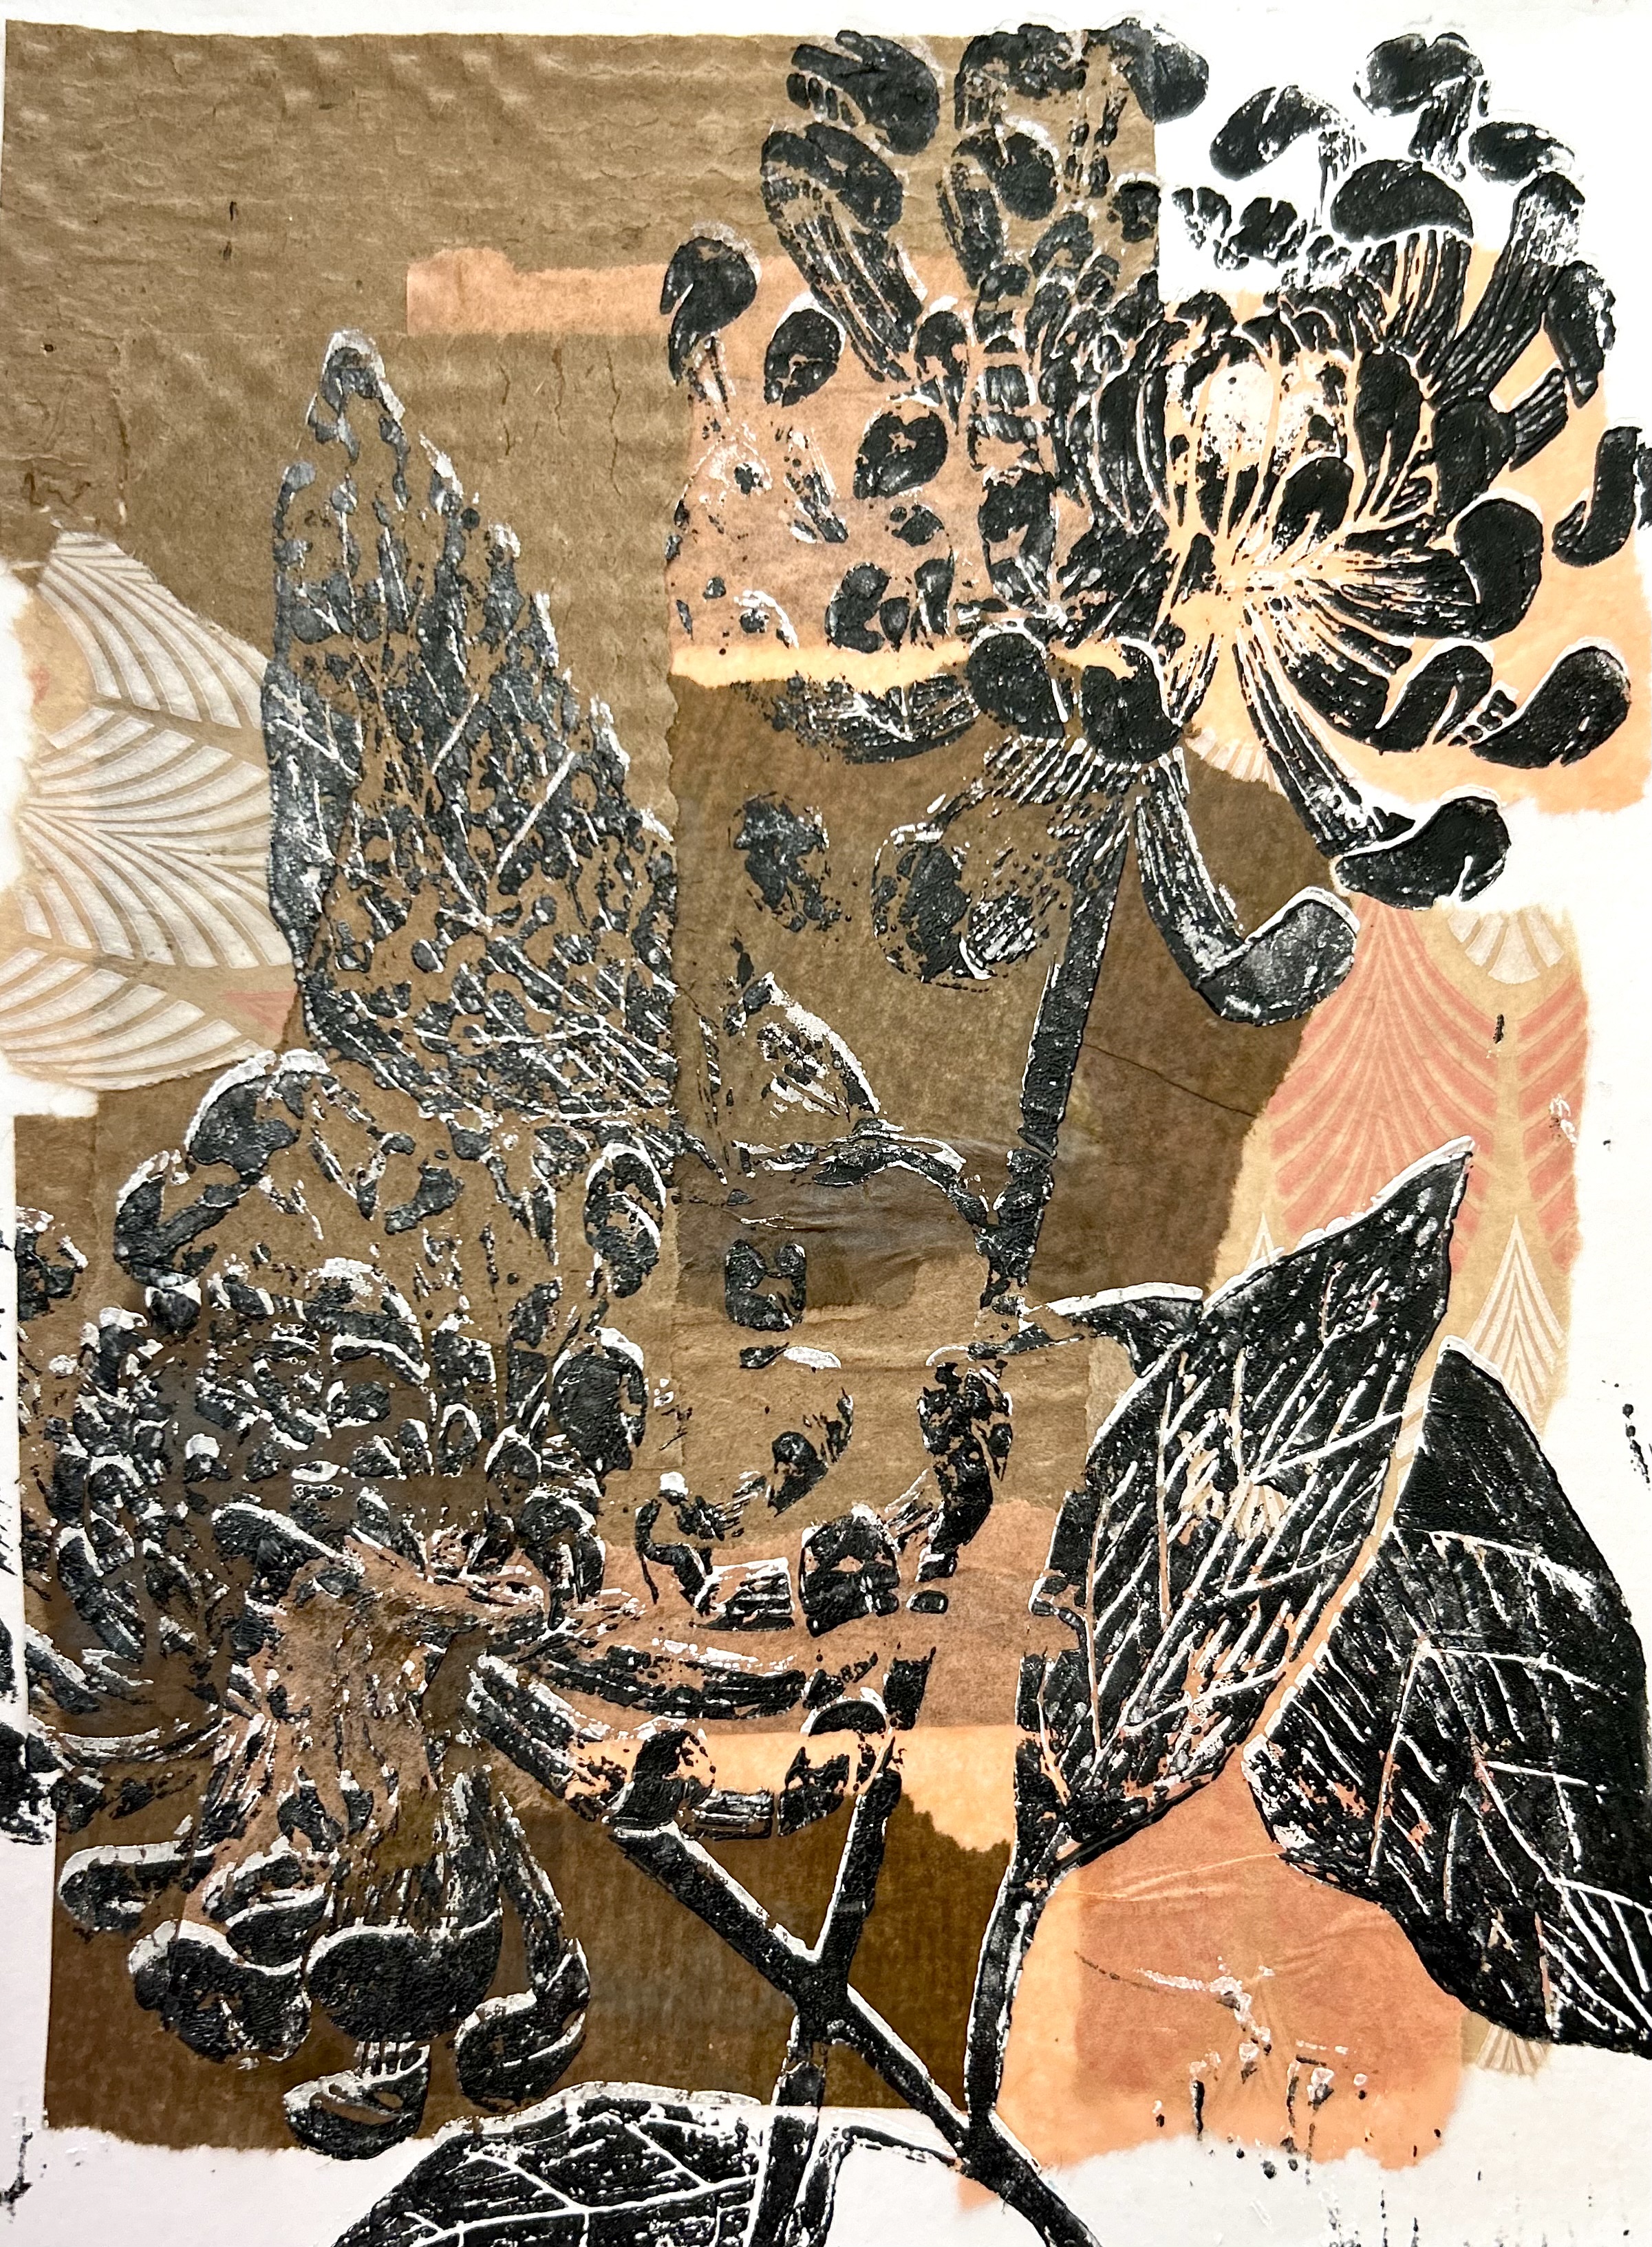 Black woodcut prints of chrysanthemums on tan, brown, peach colored pieces of patterned paper